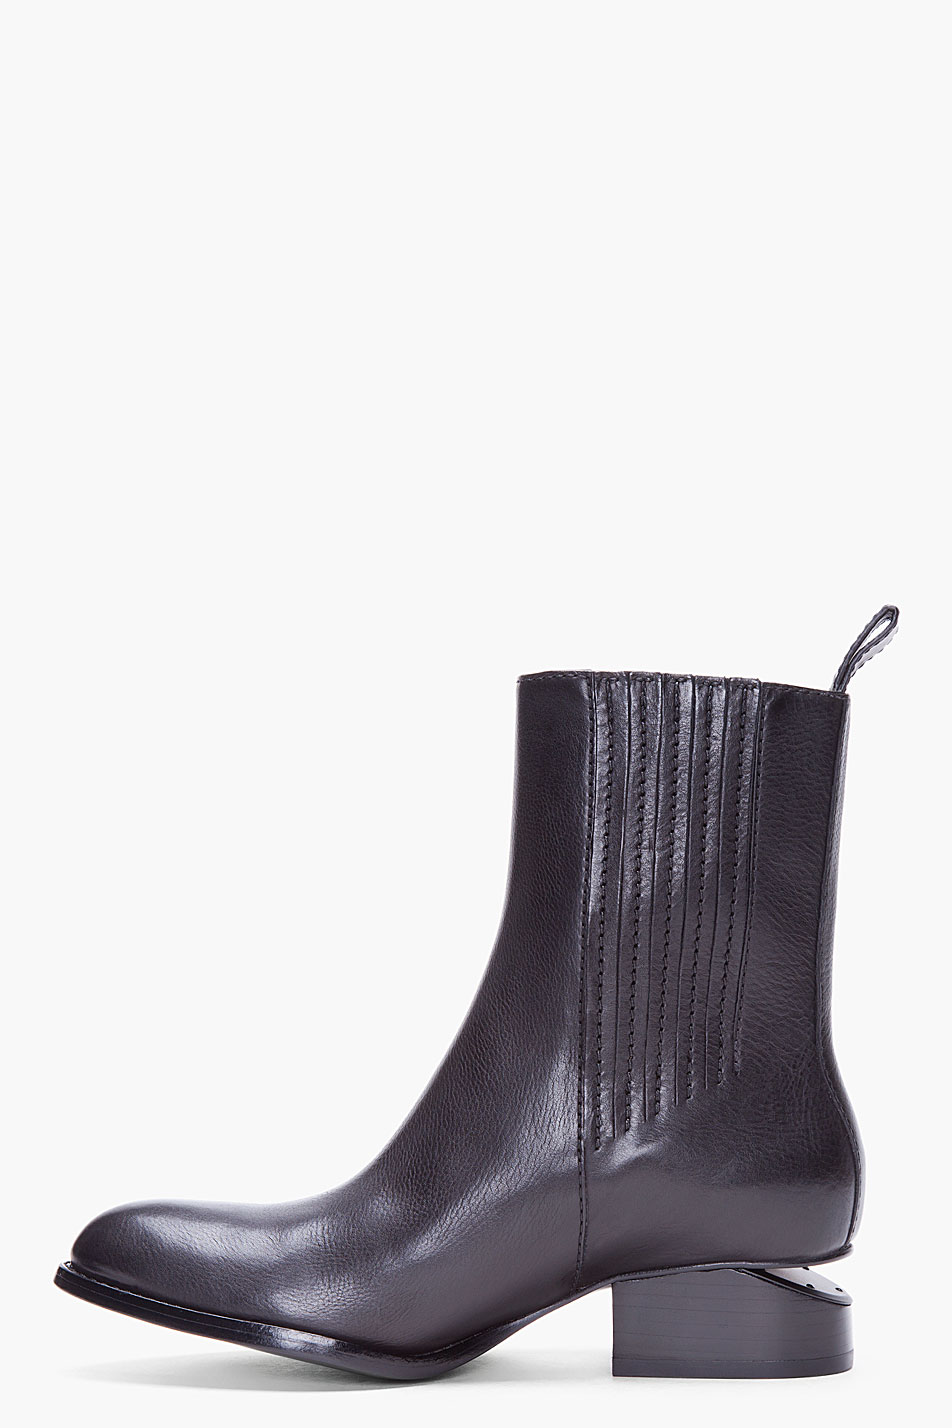 Alexander wang Black Leather Anouck Chelsea Boots in Black | Lyst